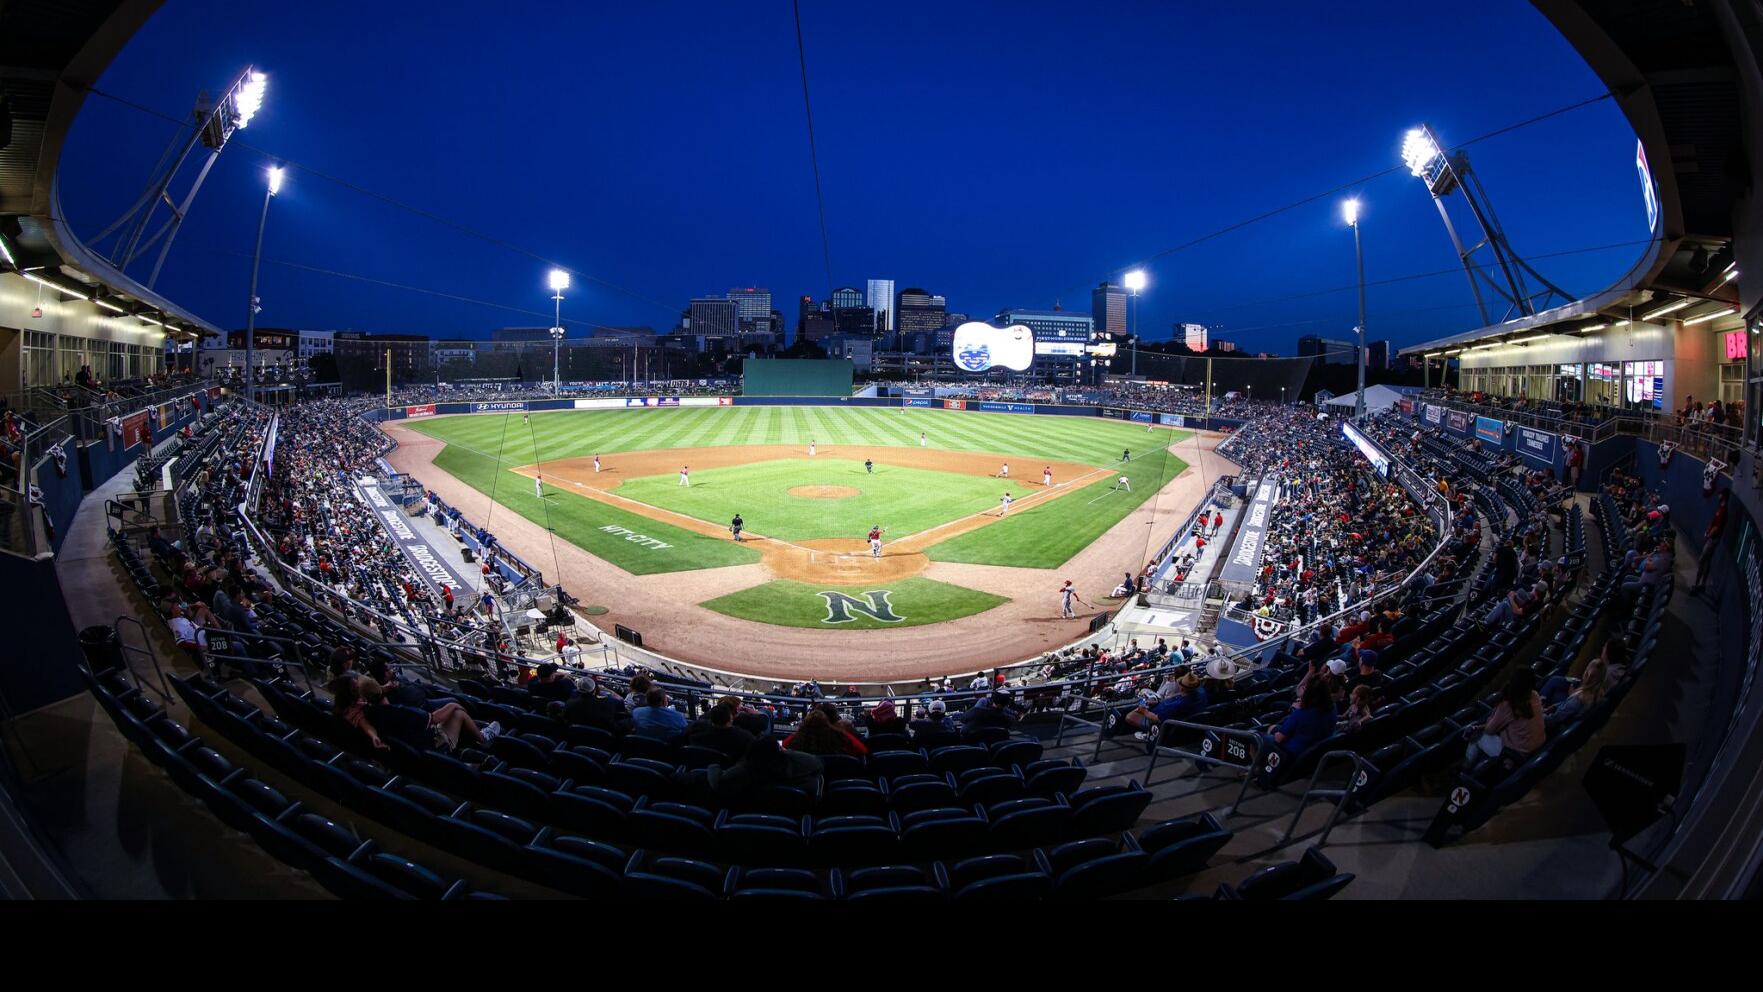 You Won't Believe These Fabulous Insider Tips for Nashville Sounds Games